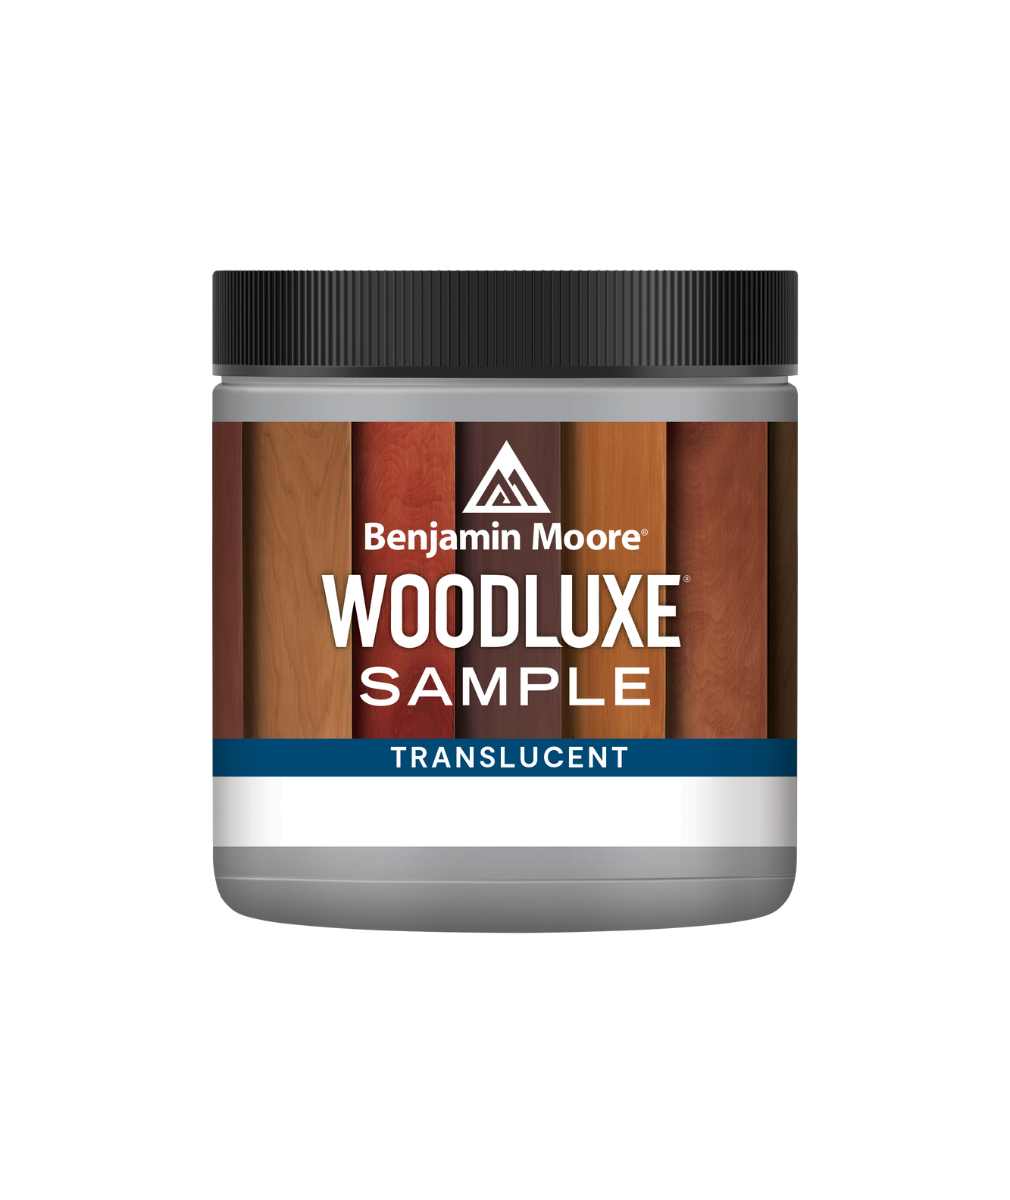 Benjamin Moore Woodluxe® Water-Based Translucent Exterior Stain Half-Pint Sample available to shop at Regal Paint Centers in Maryland, Virginia and DC.